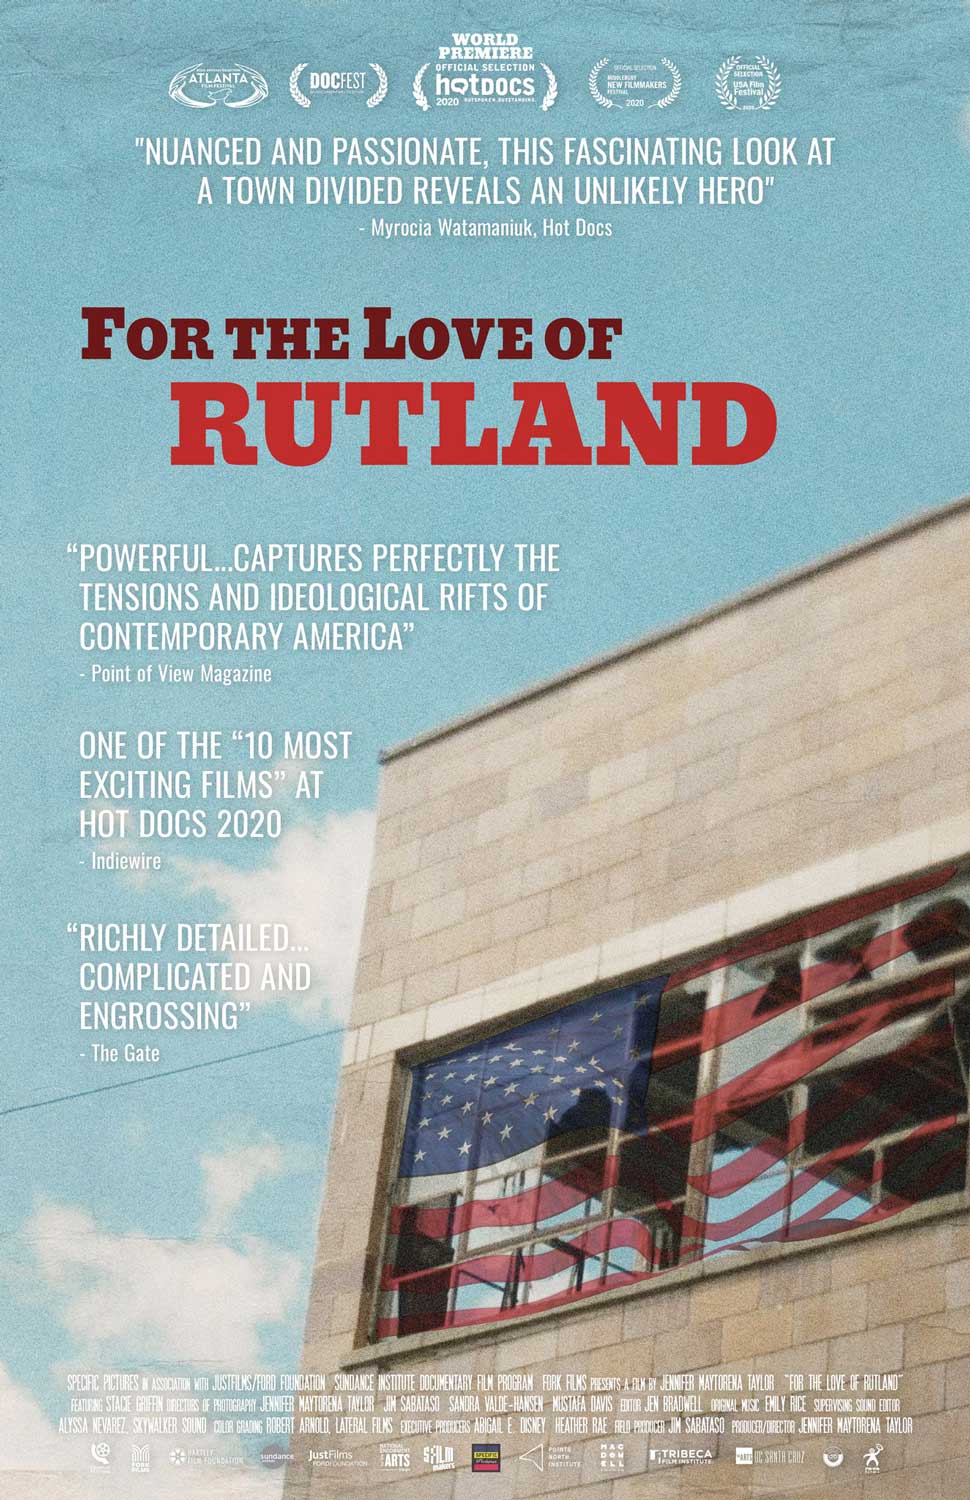 For the Love of Rutland